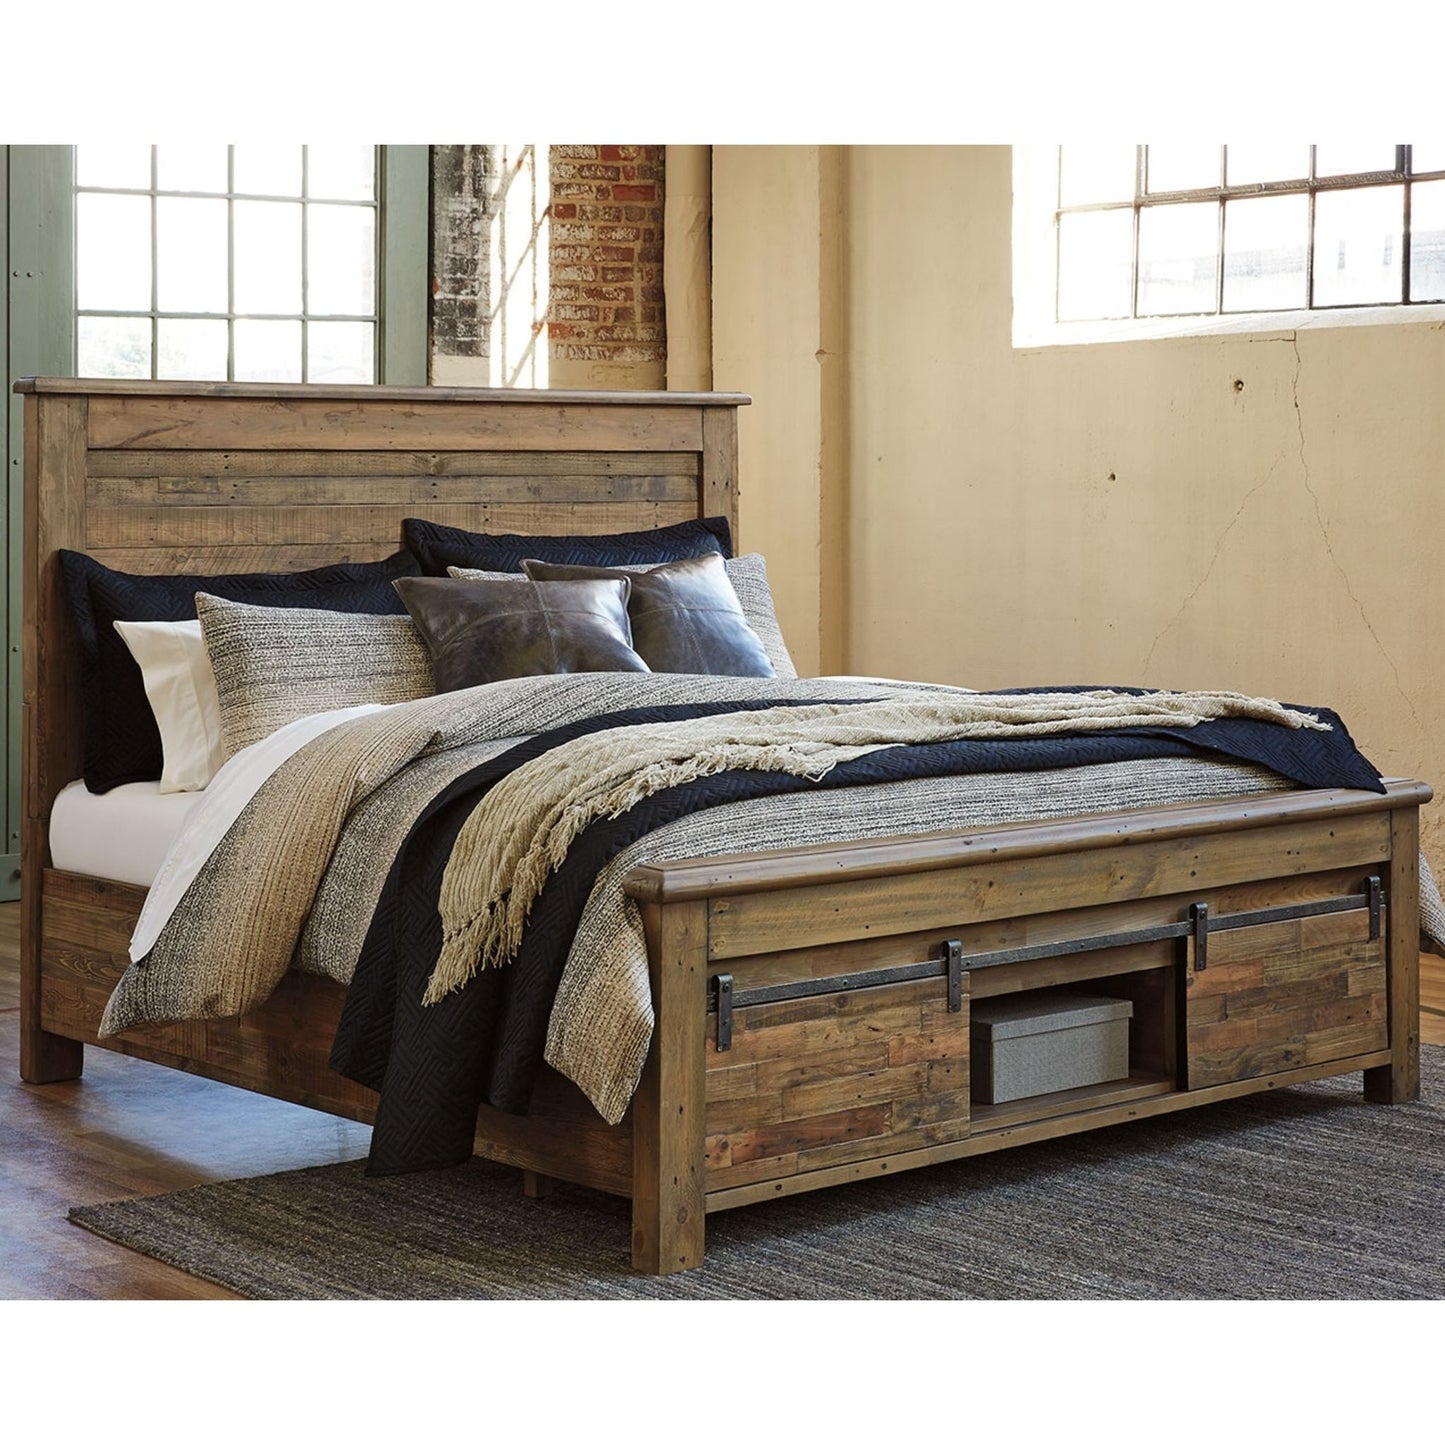 Sommerford 3 Piece Bed with Storage